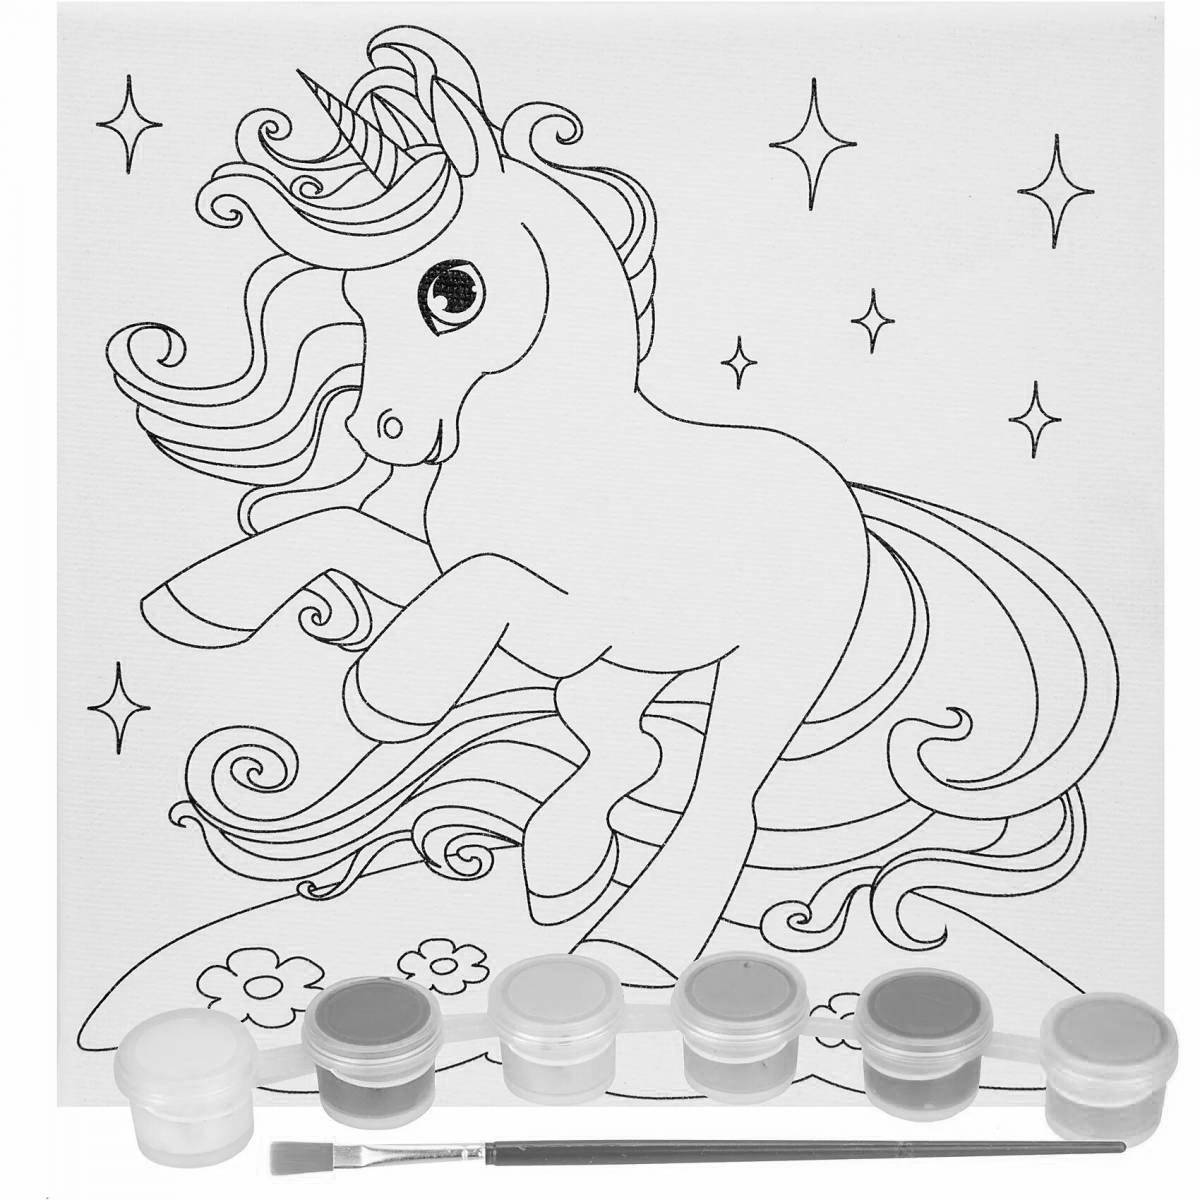 Adorable unicorn coloring by numbers